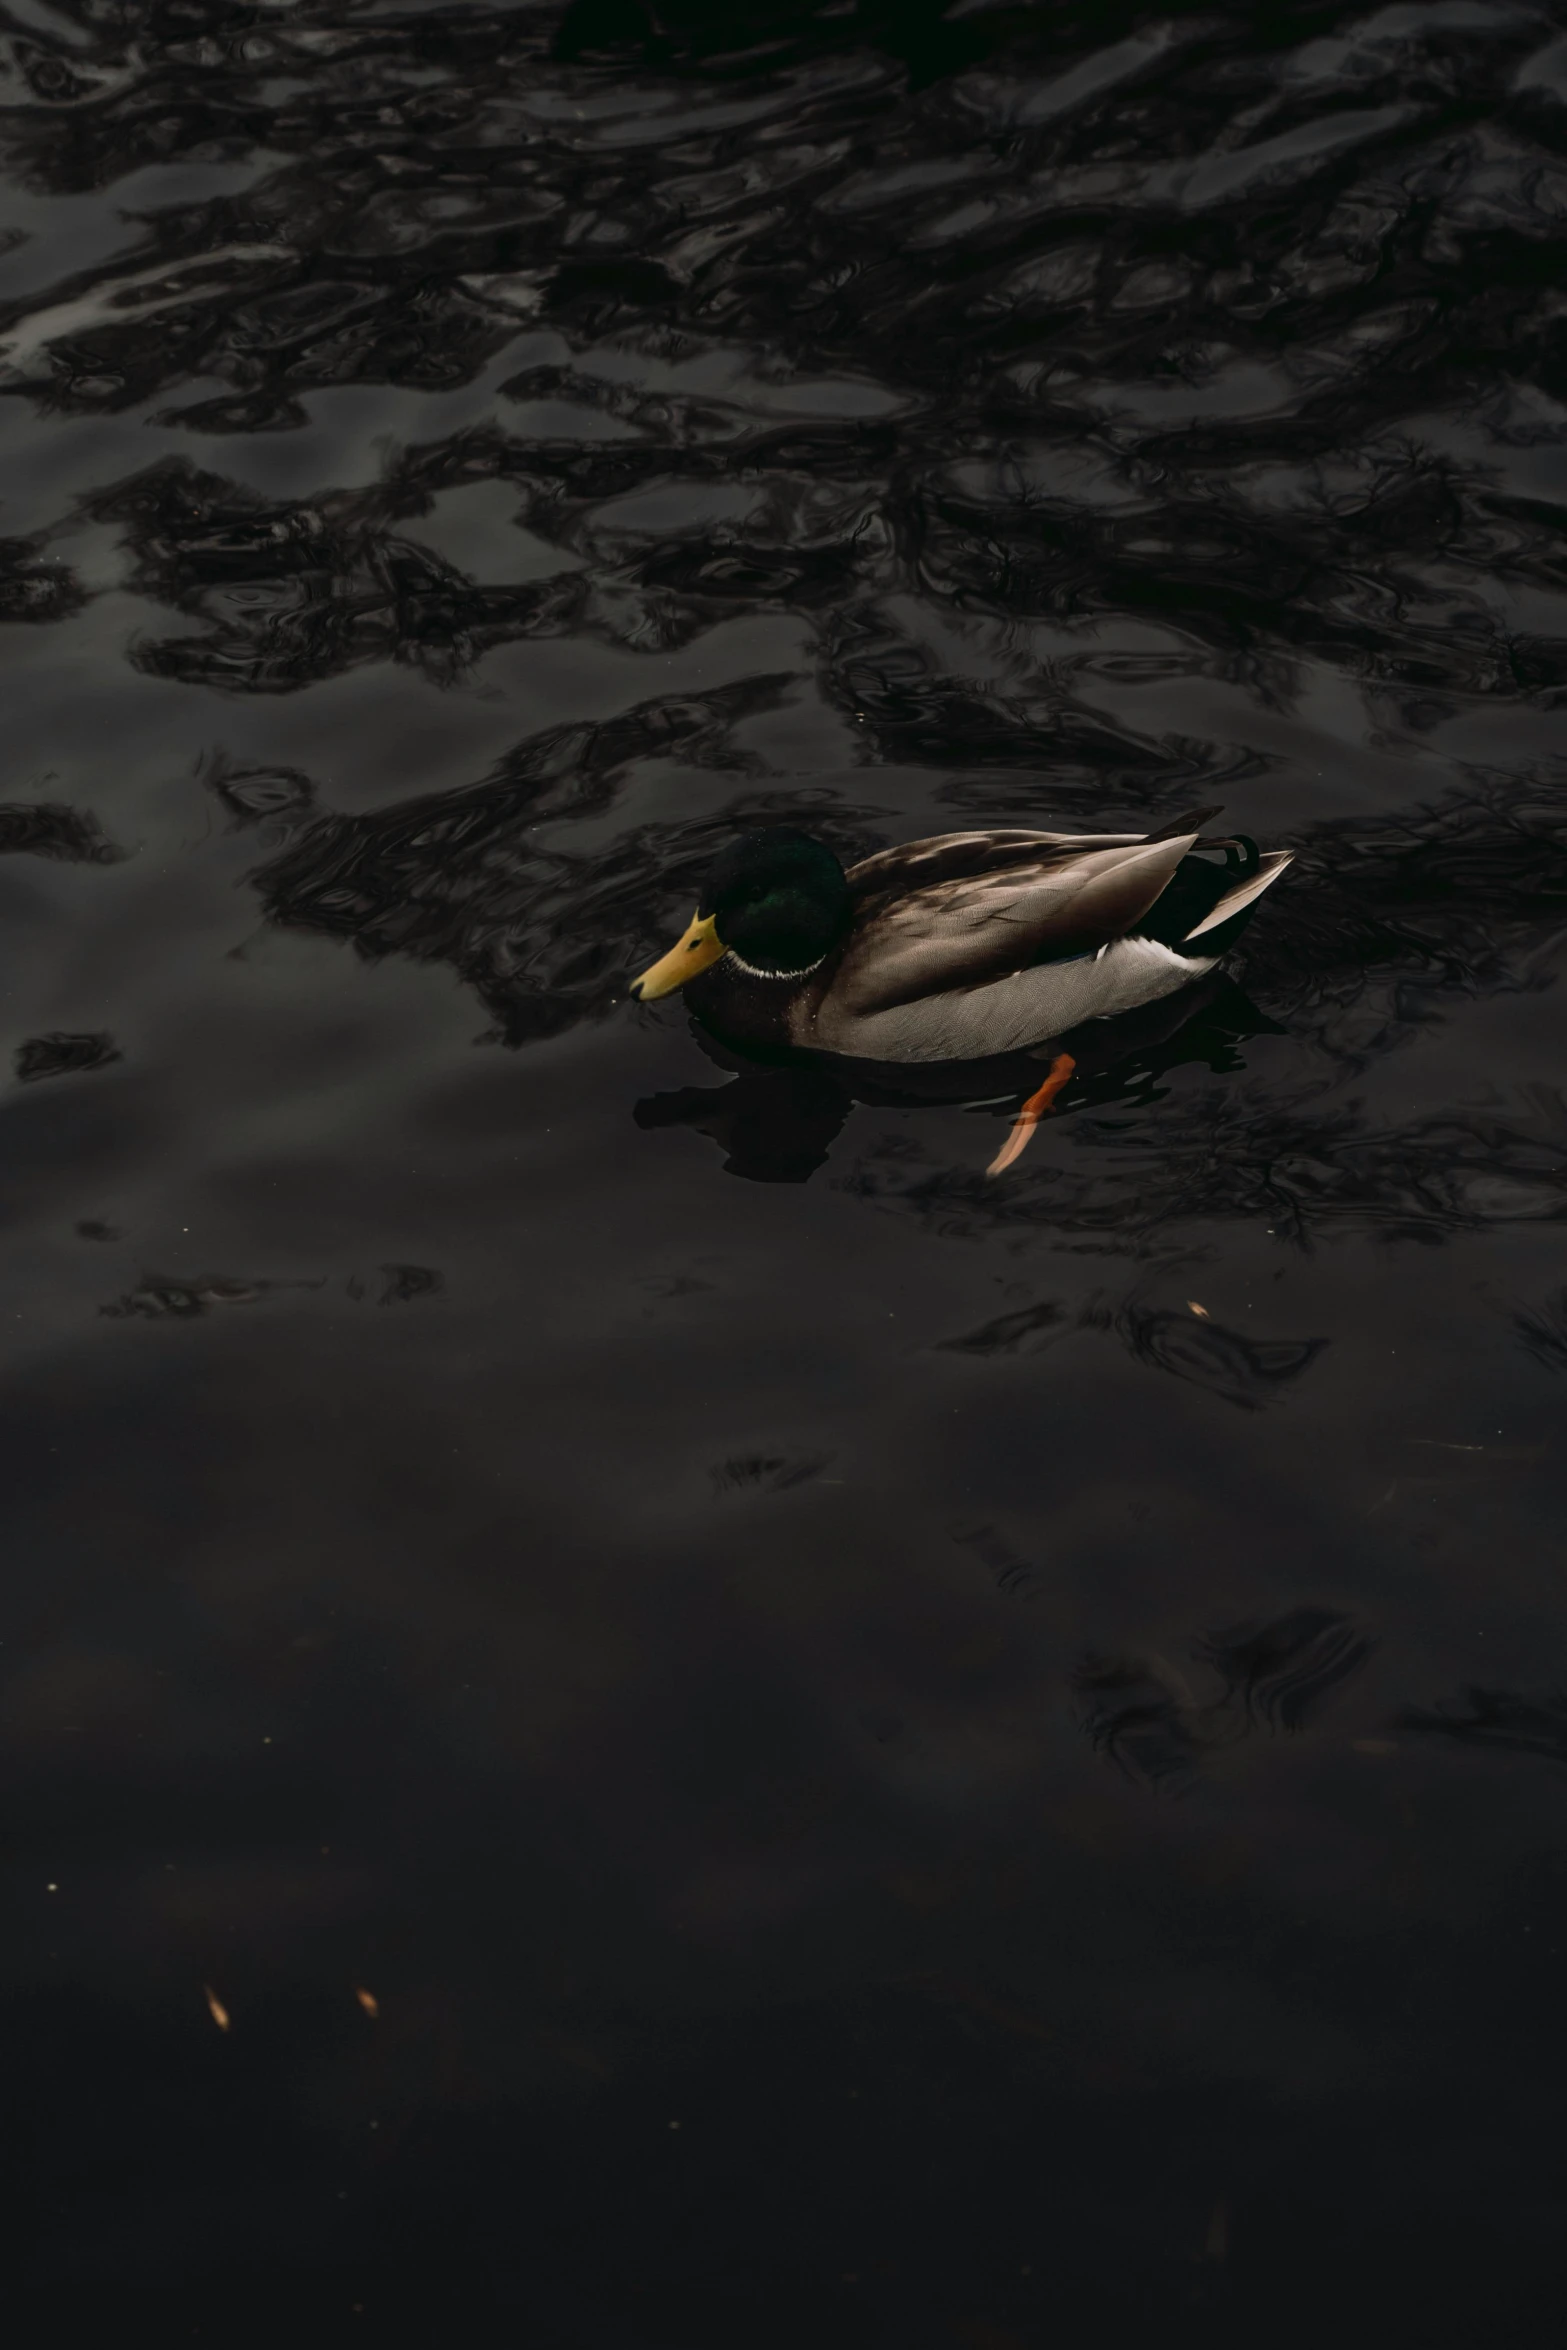 the duck is floating on a very dark water